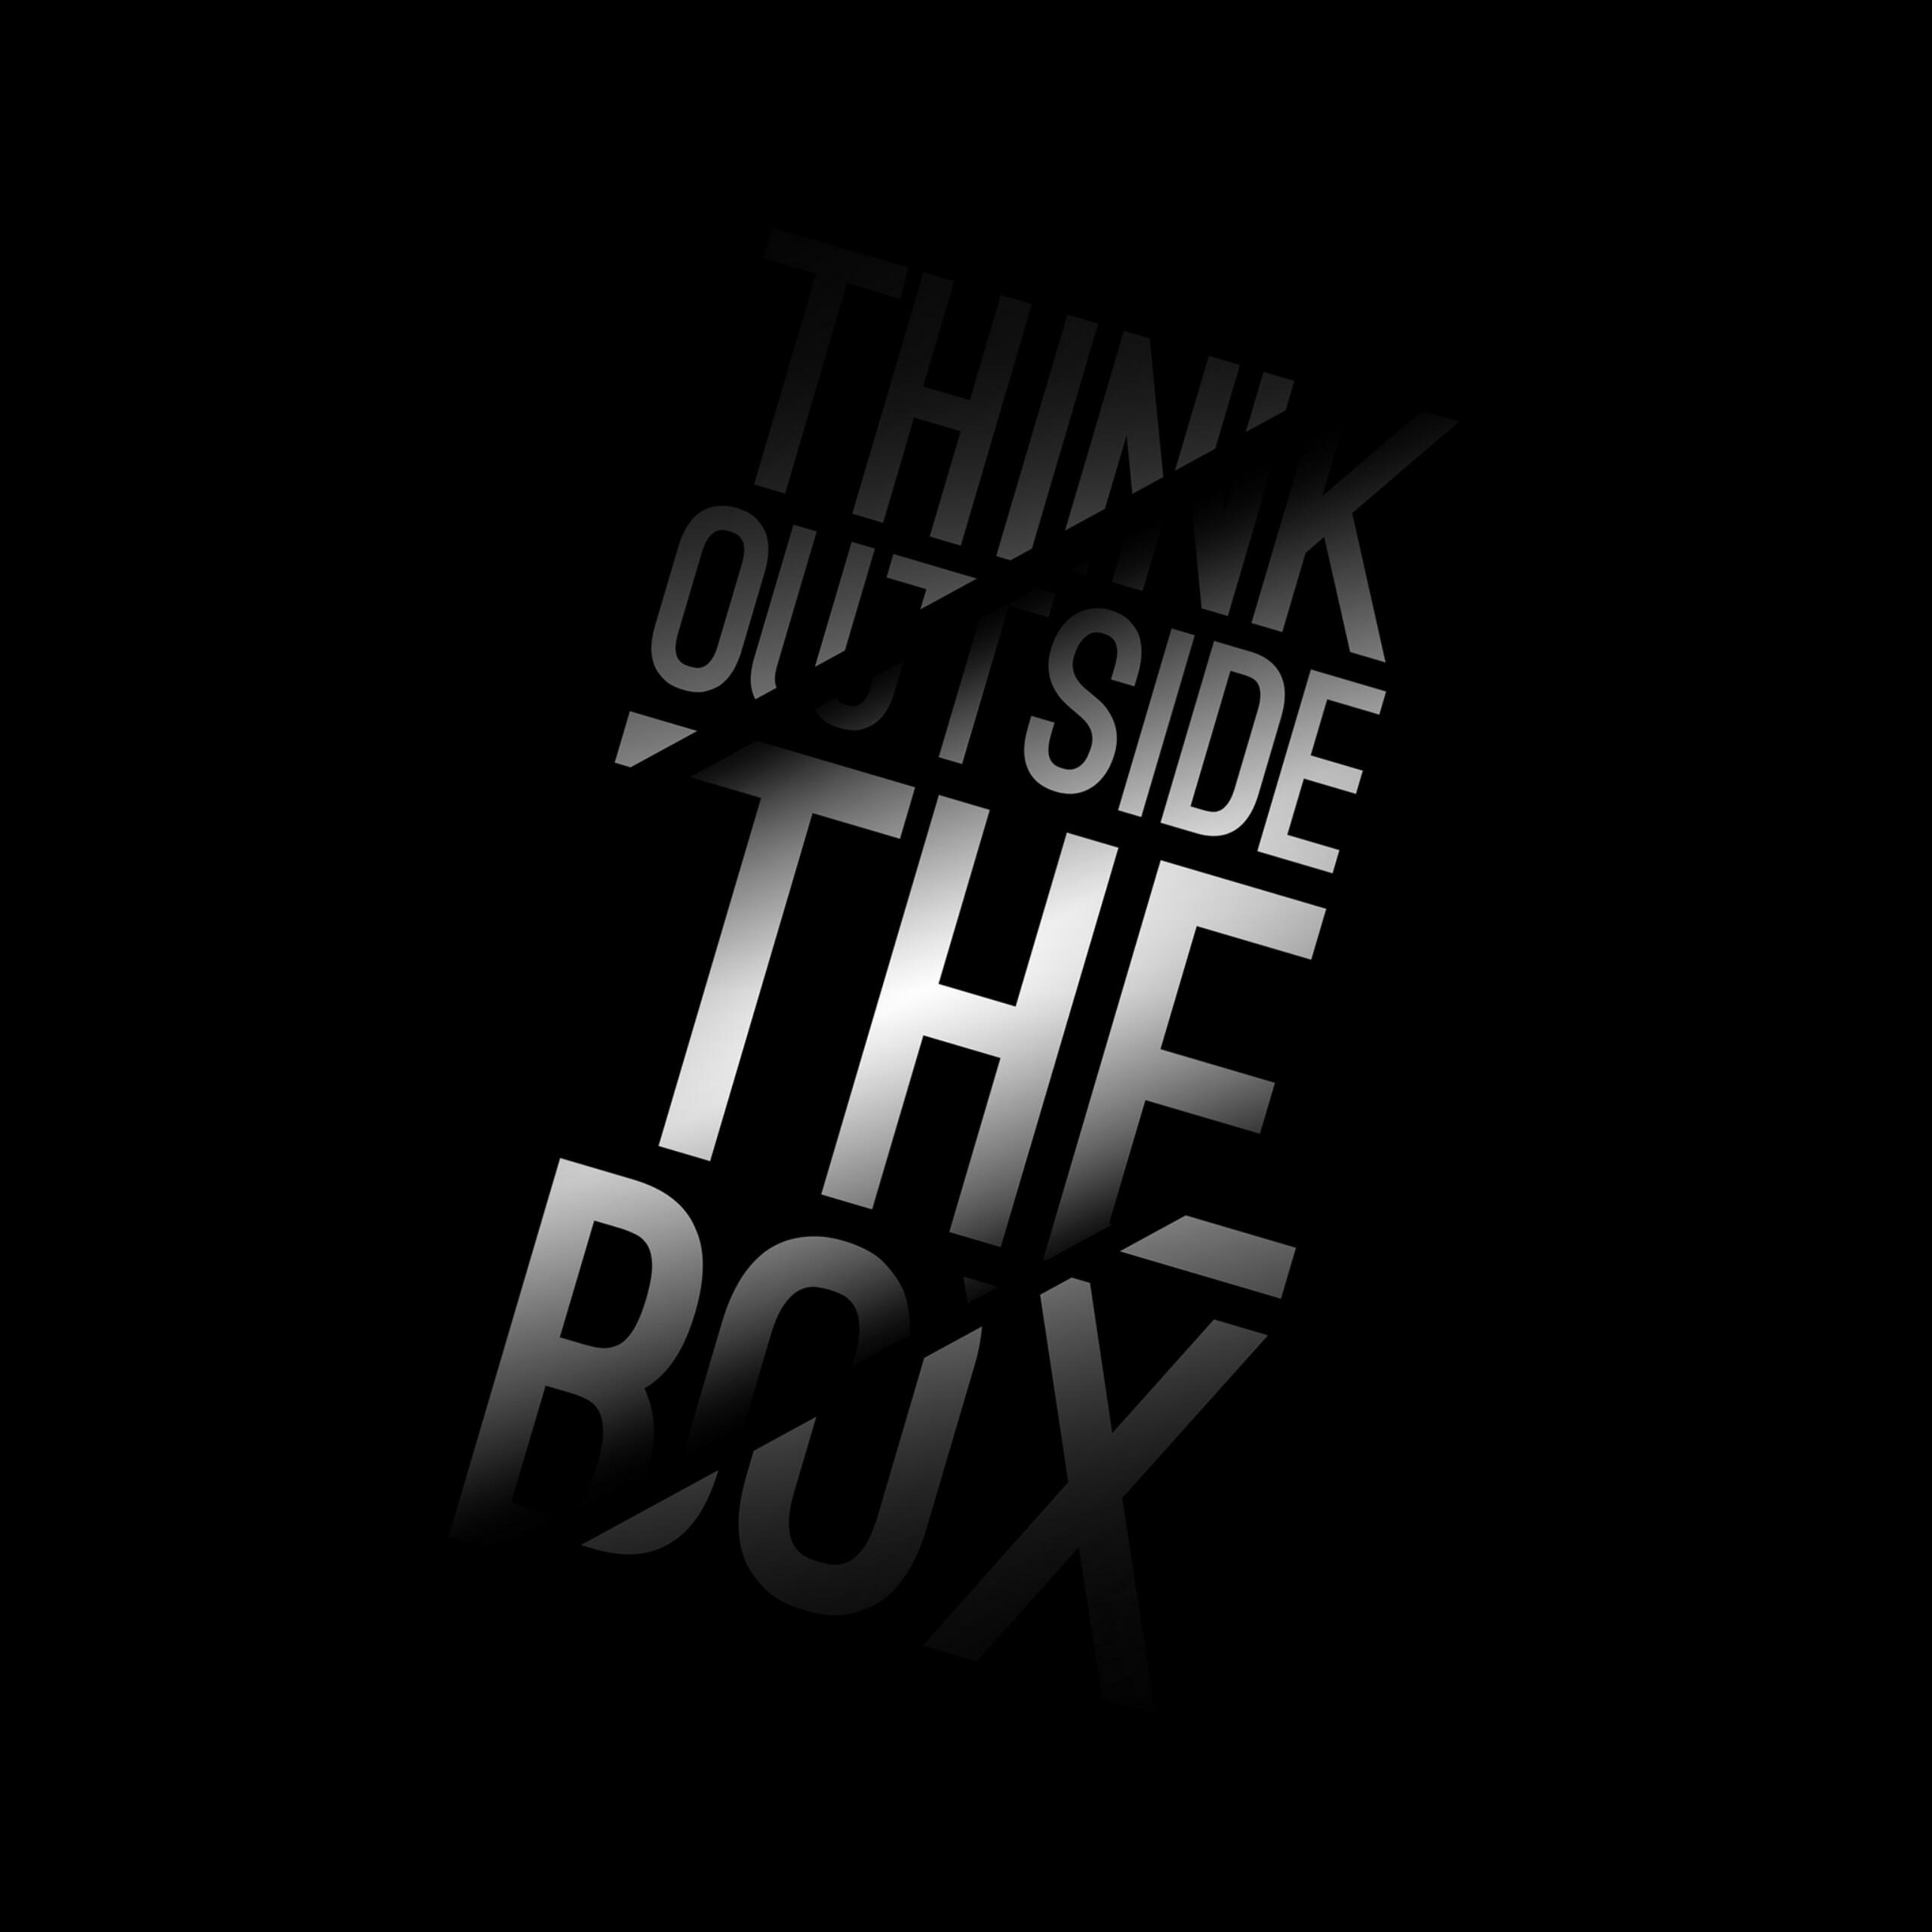 Think Outside The Box Quotes QHD Wallpaper